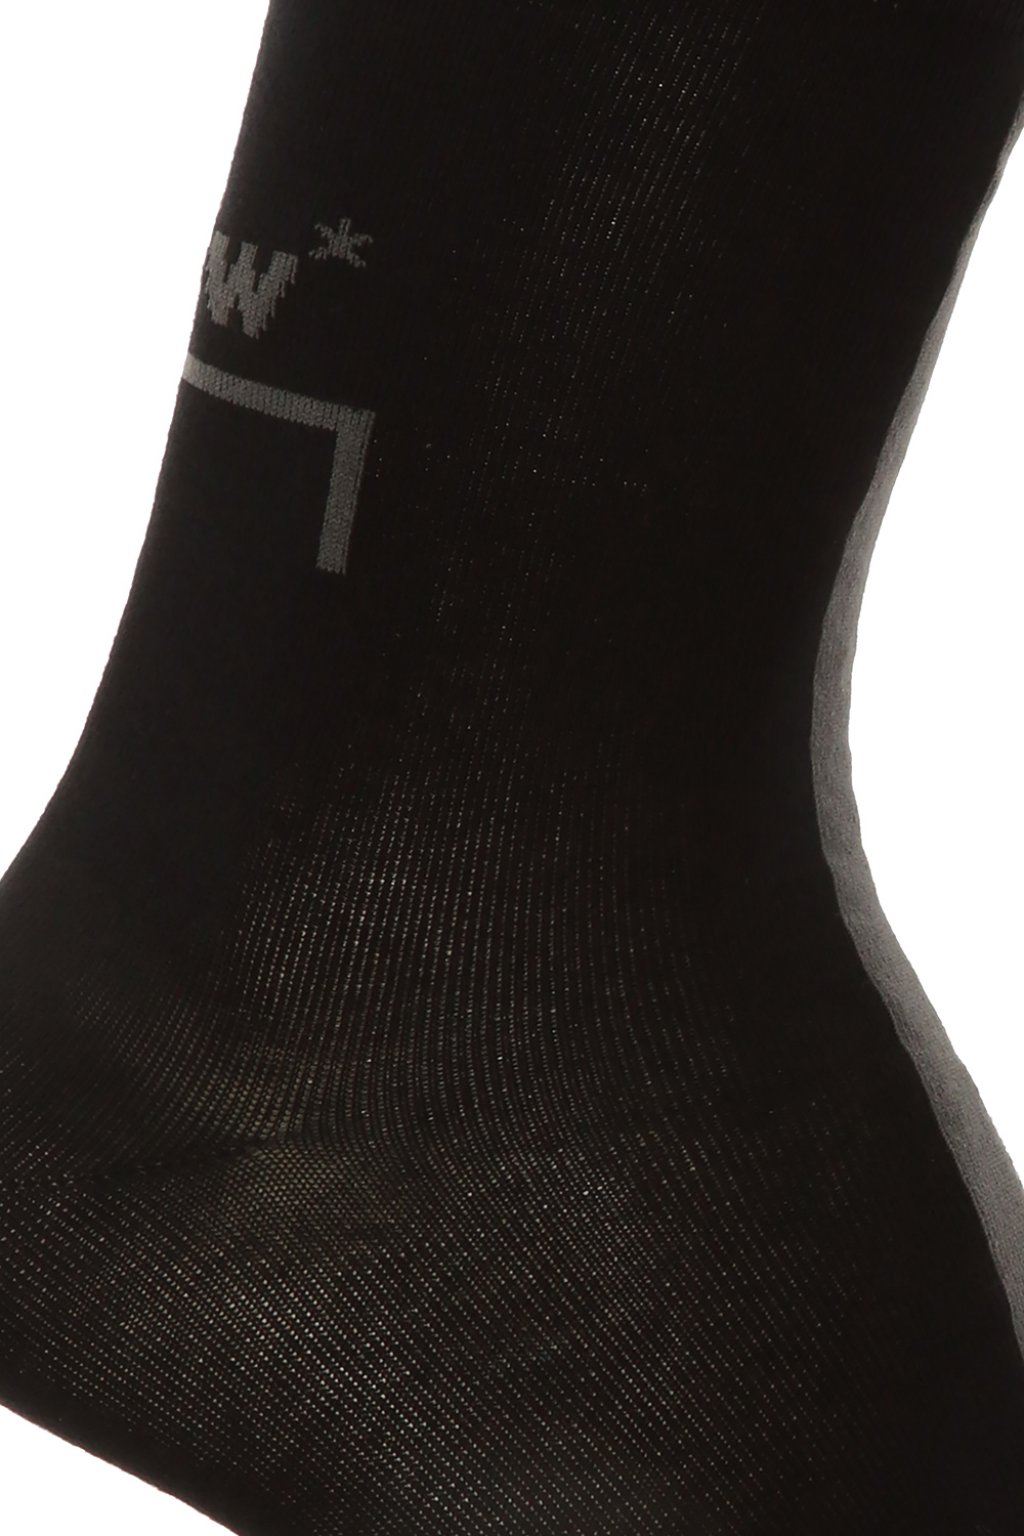 A-COLD-WALL* A-COLD-WALL* SOCKS WITH LOGO